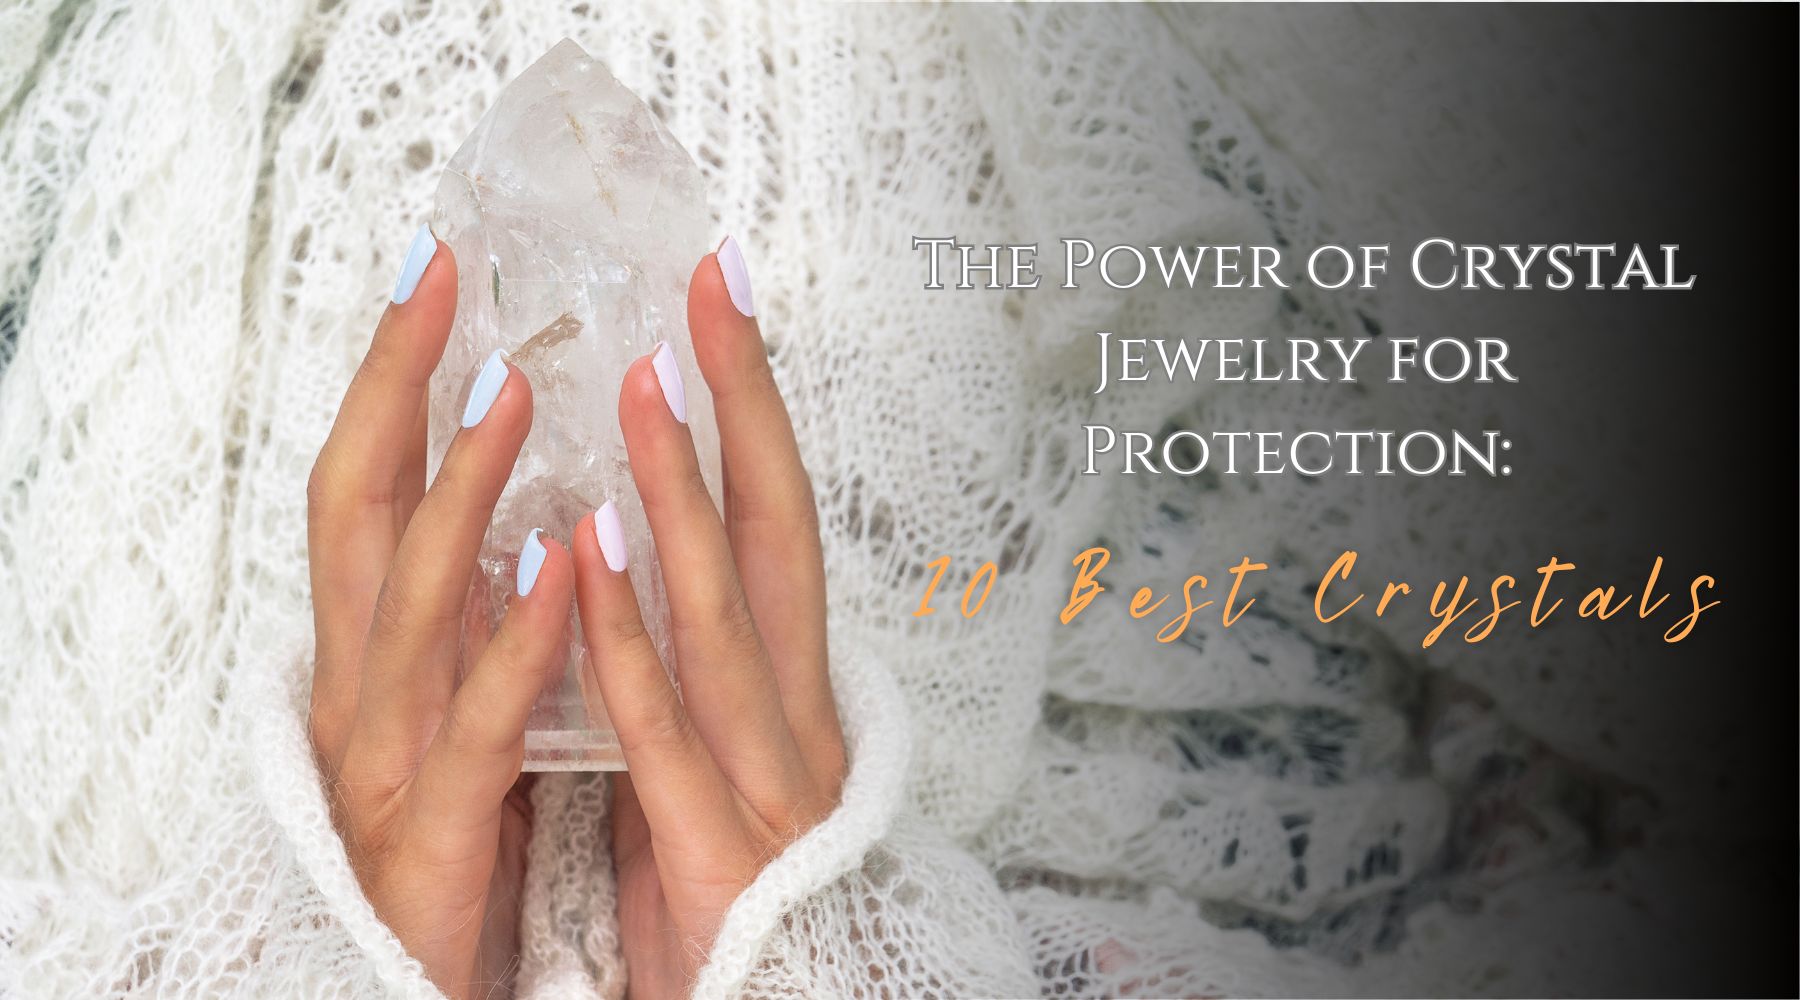 The Power of Crystal Jewelry for Protection: 10 Best Crystals